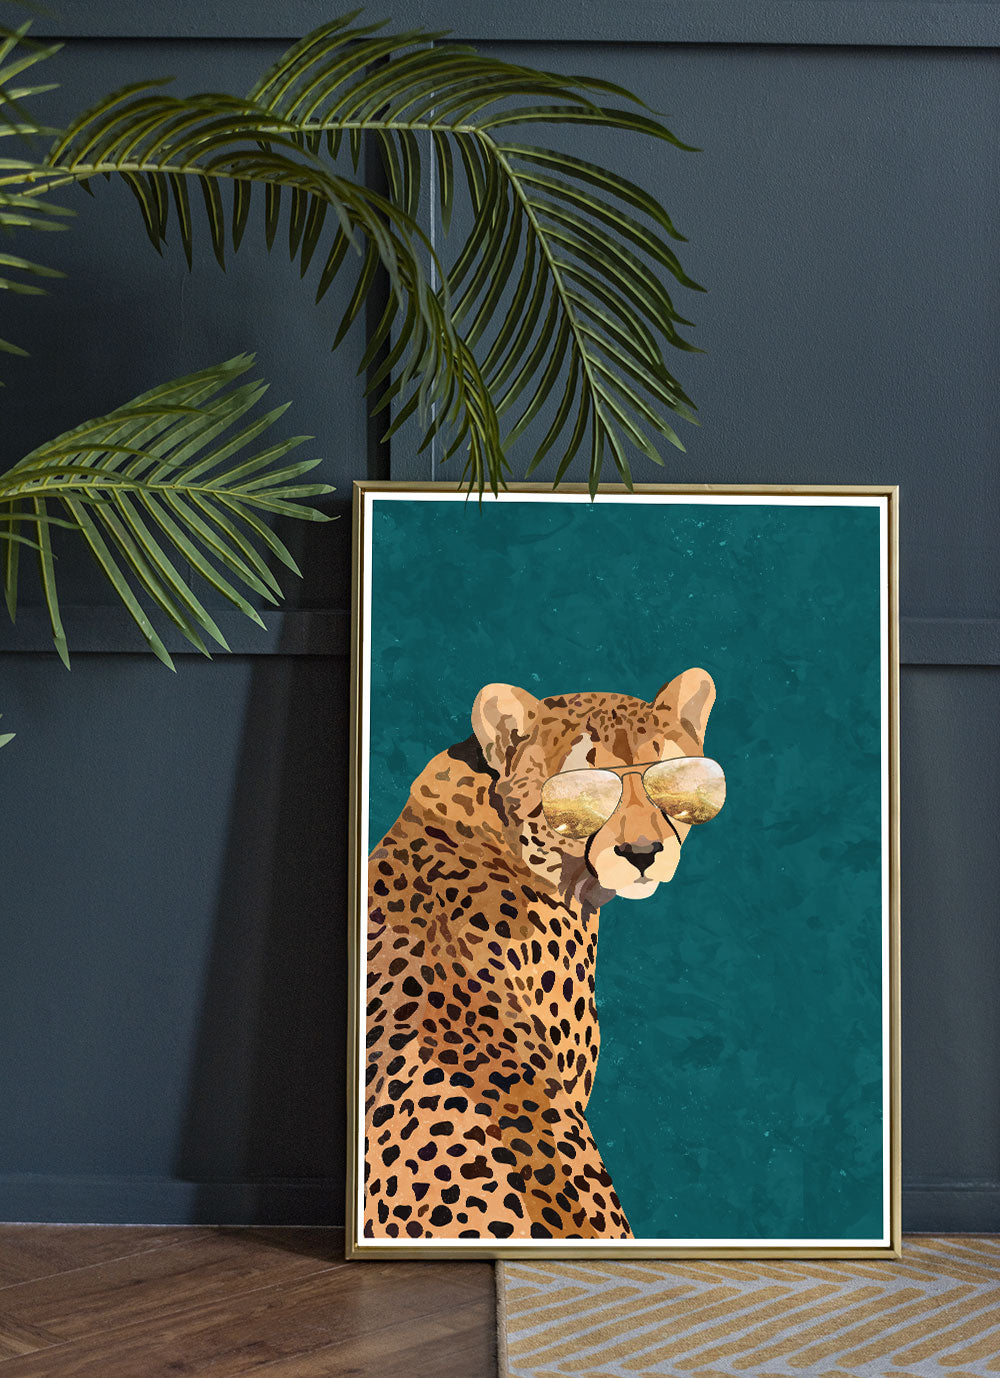 Cool Cheetah Art Print by Sarah Manovski in a room with a plant and navy blue panelled wall